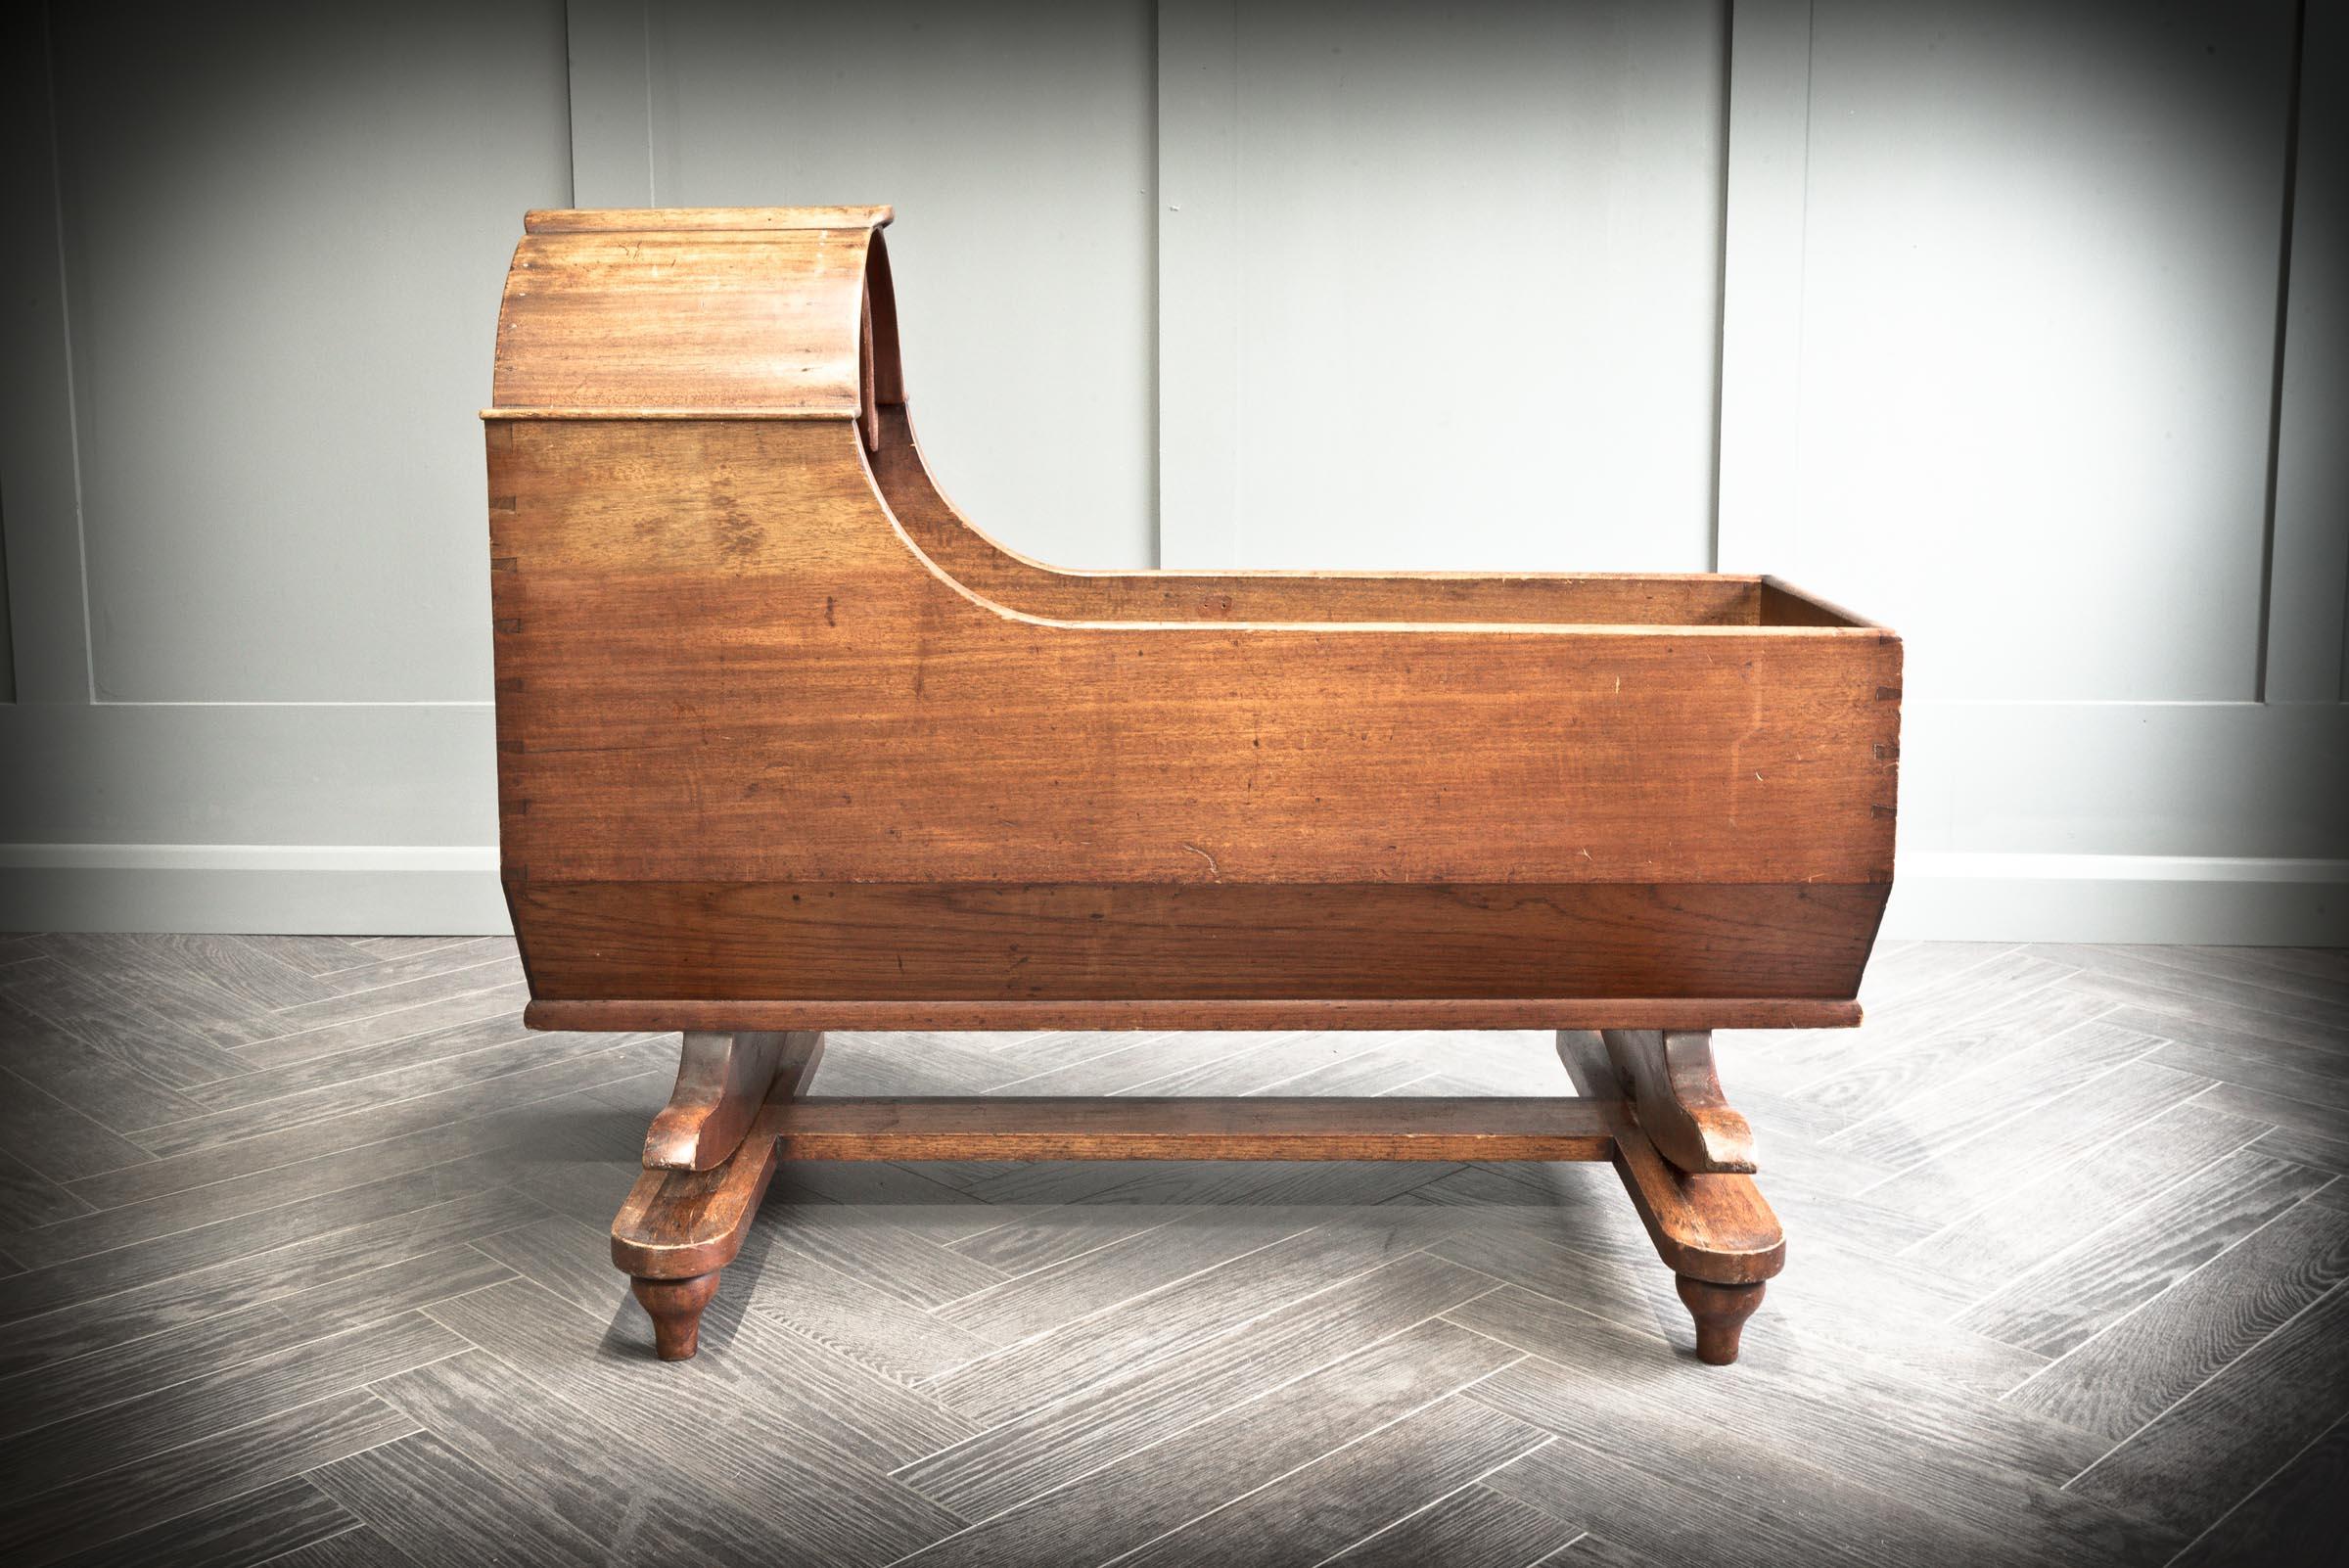 Solid mahogany childs cradle with hood. The cradle sits on a flat base and has two curved feet which allows the cradle to rock back side to side. This cradle is typical of the Victorian period with a beautiful natural grain to the mahogany.